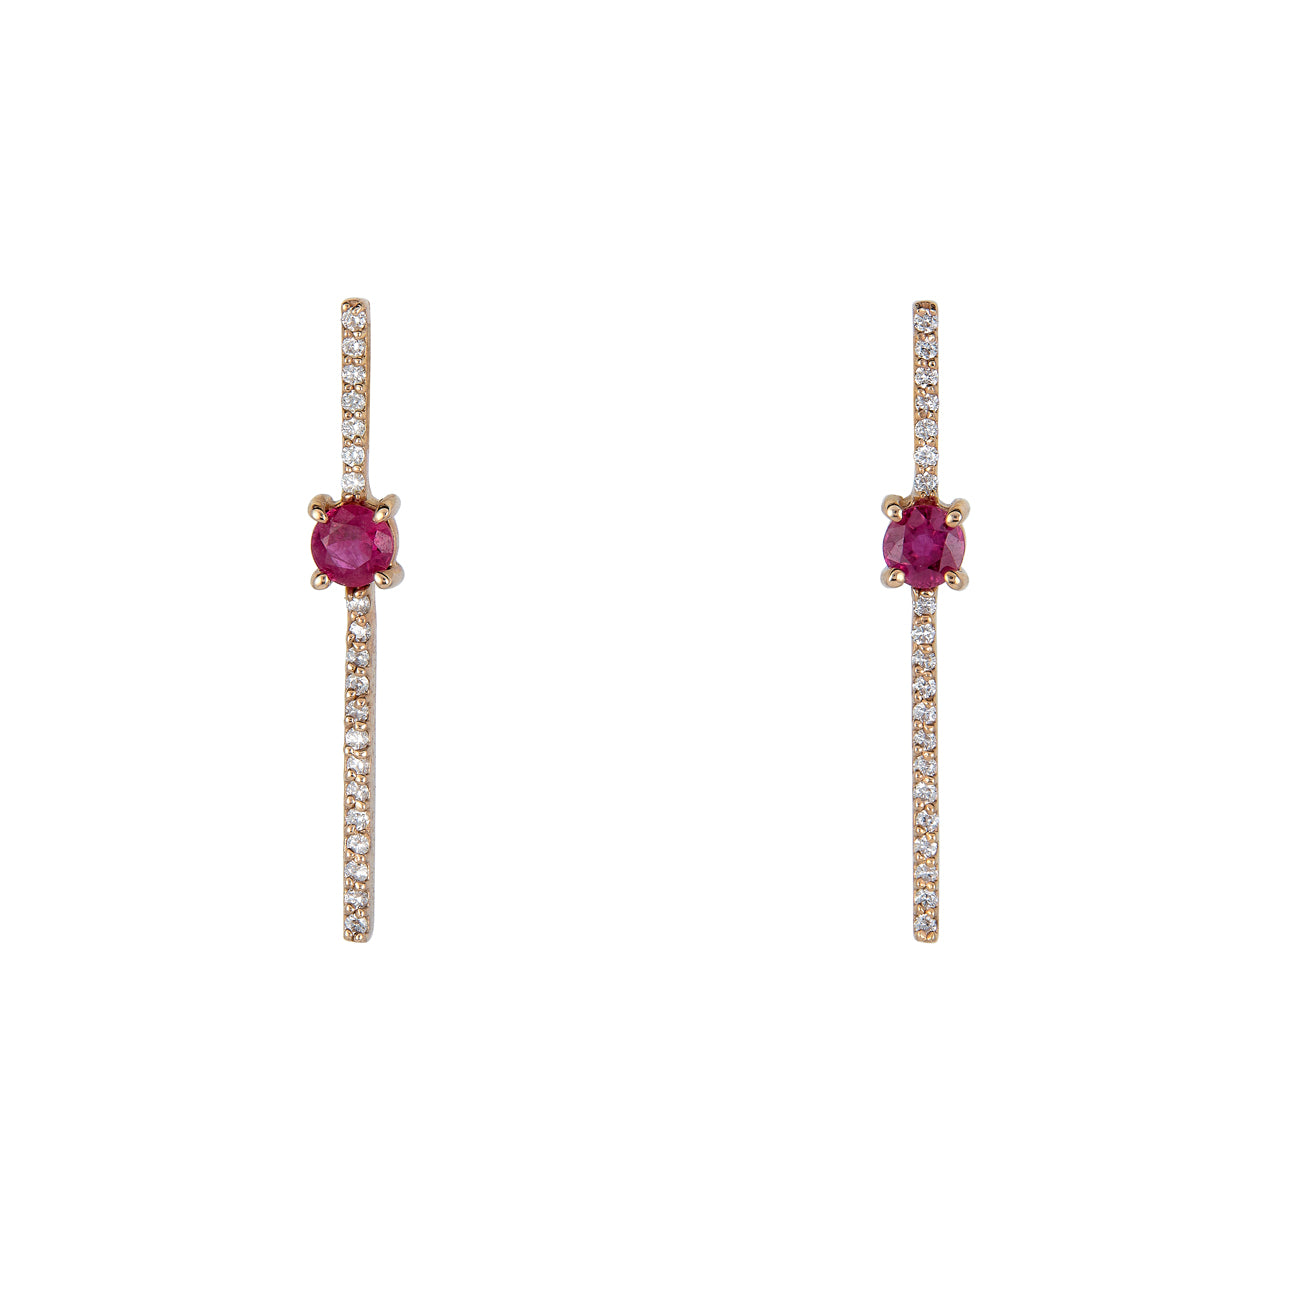 Diamond & Round Ruby Drop Bar Earrings Yellow 14K Gold / Made to Order